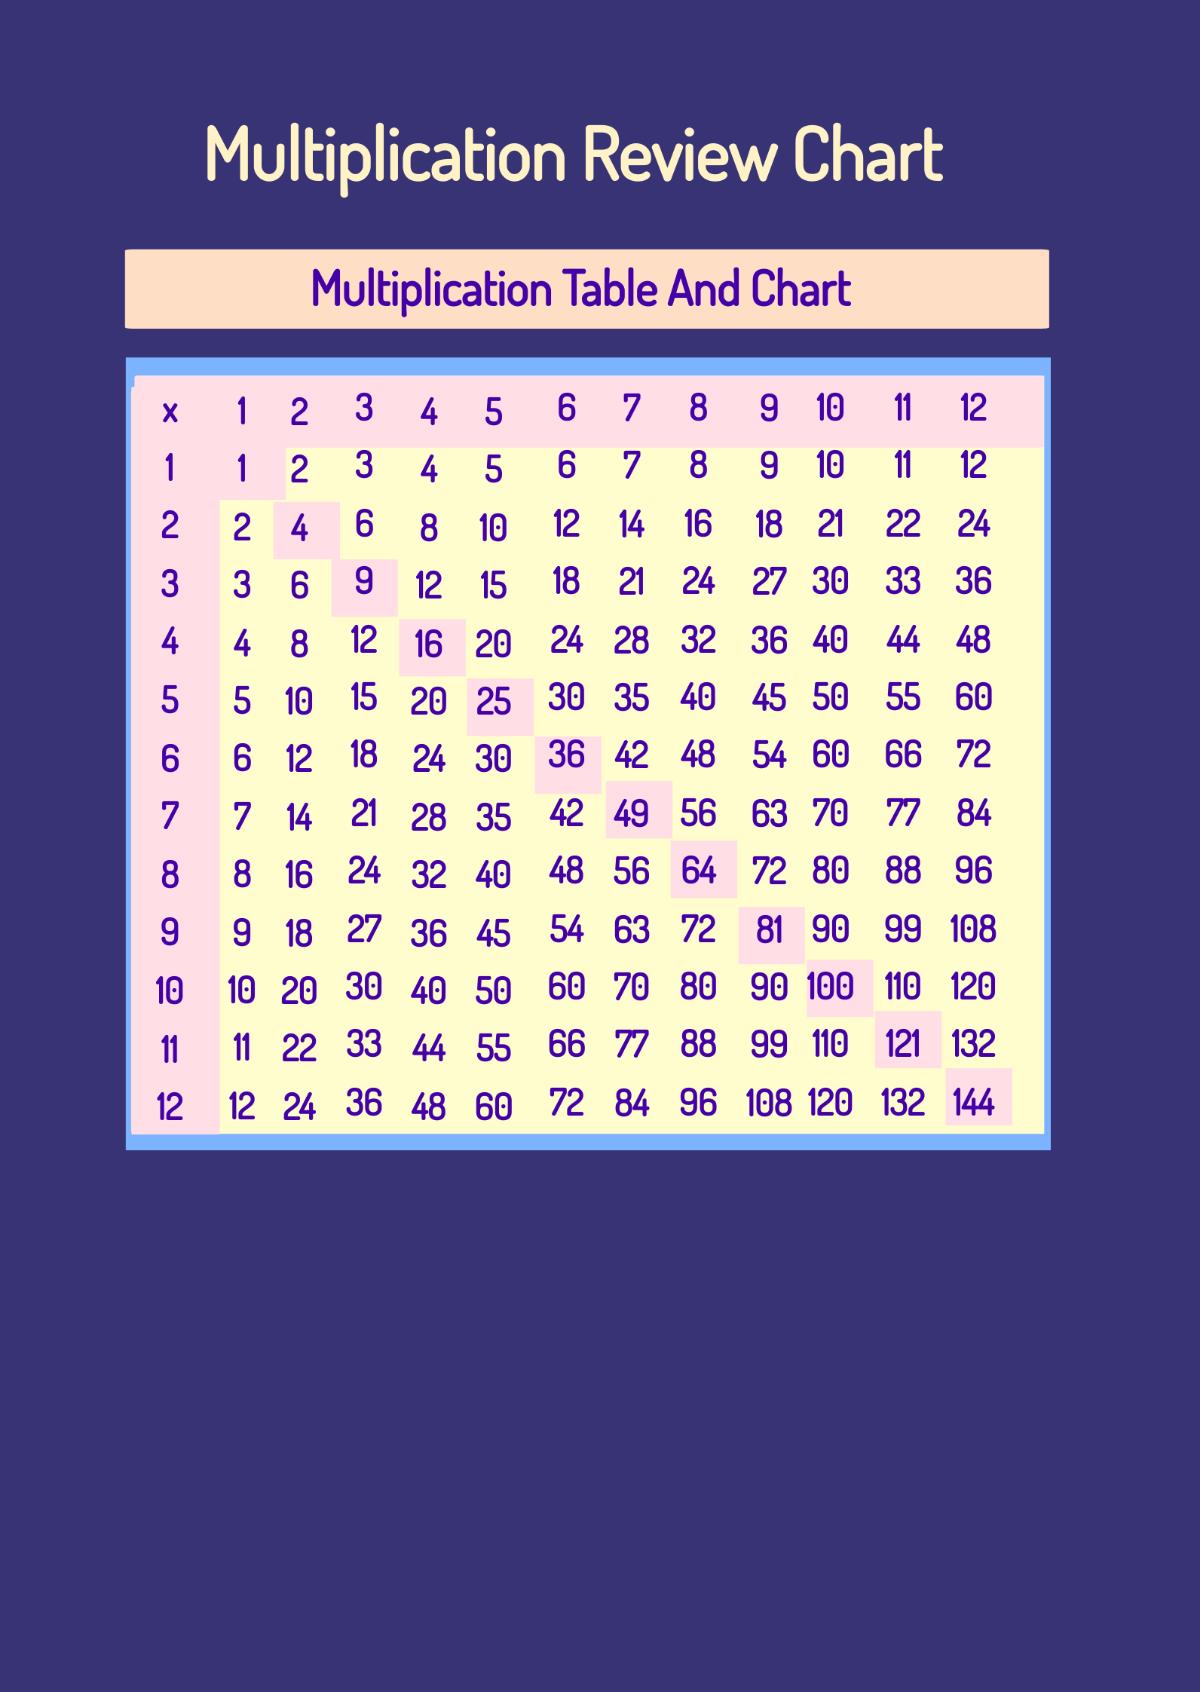 Multiplication Review Chart